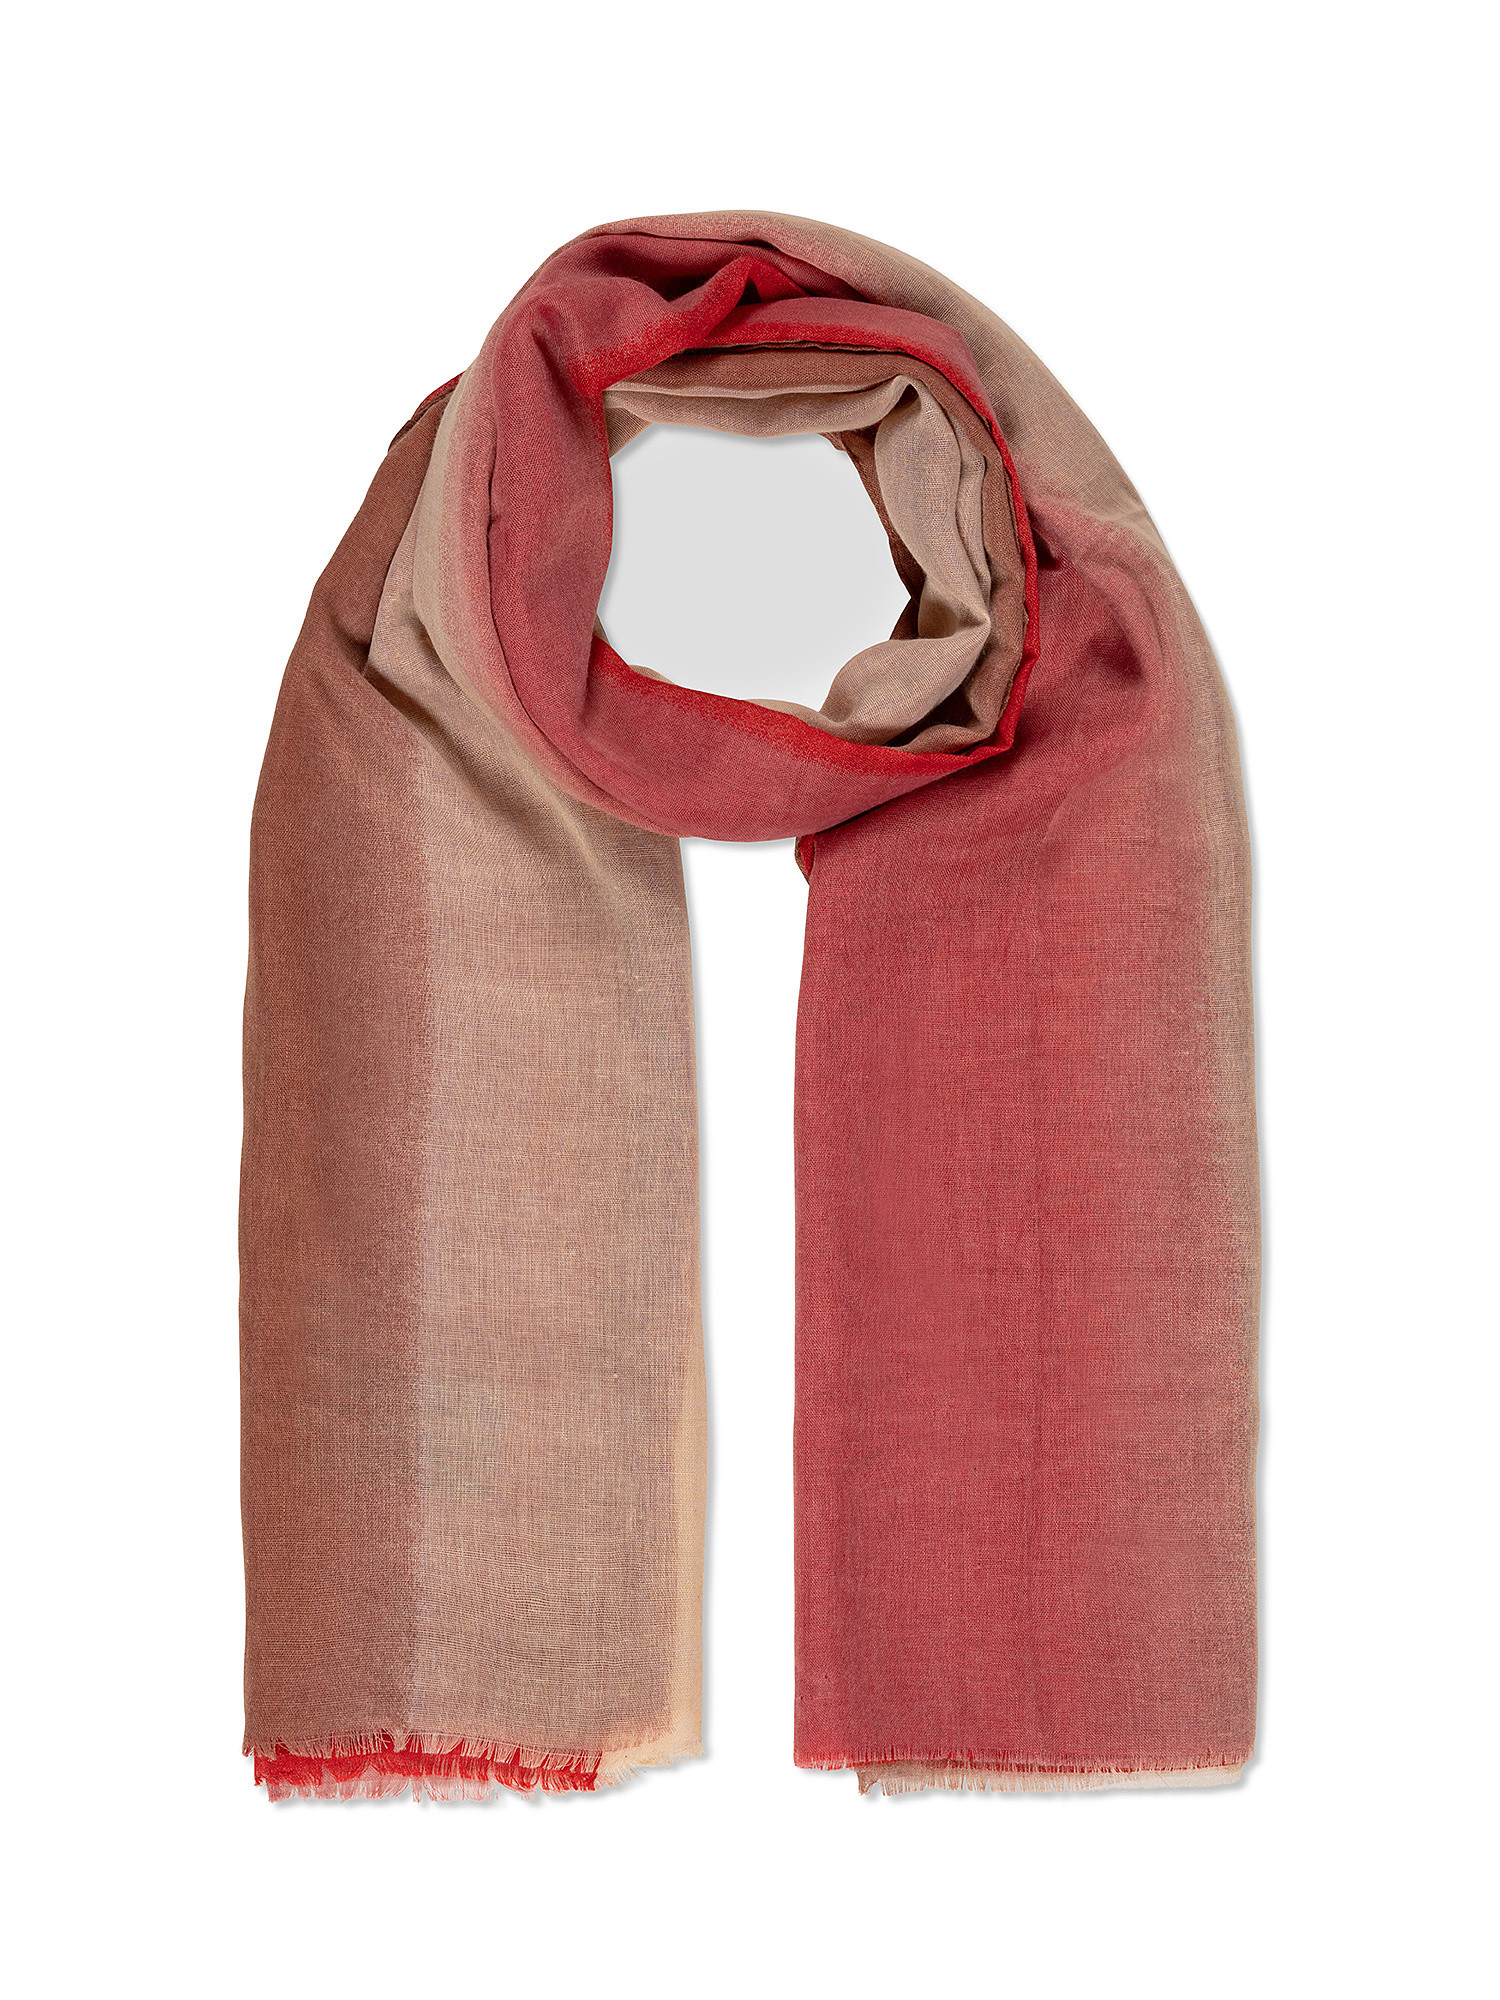 Koan - Scarves with shades, Red, large image number 0